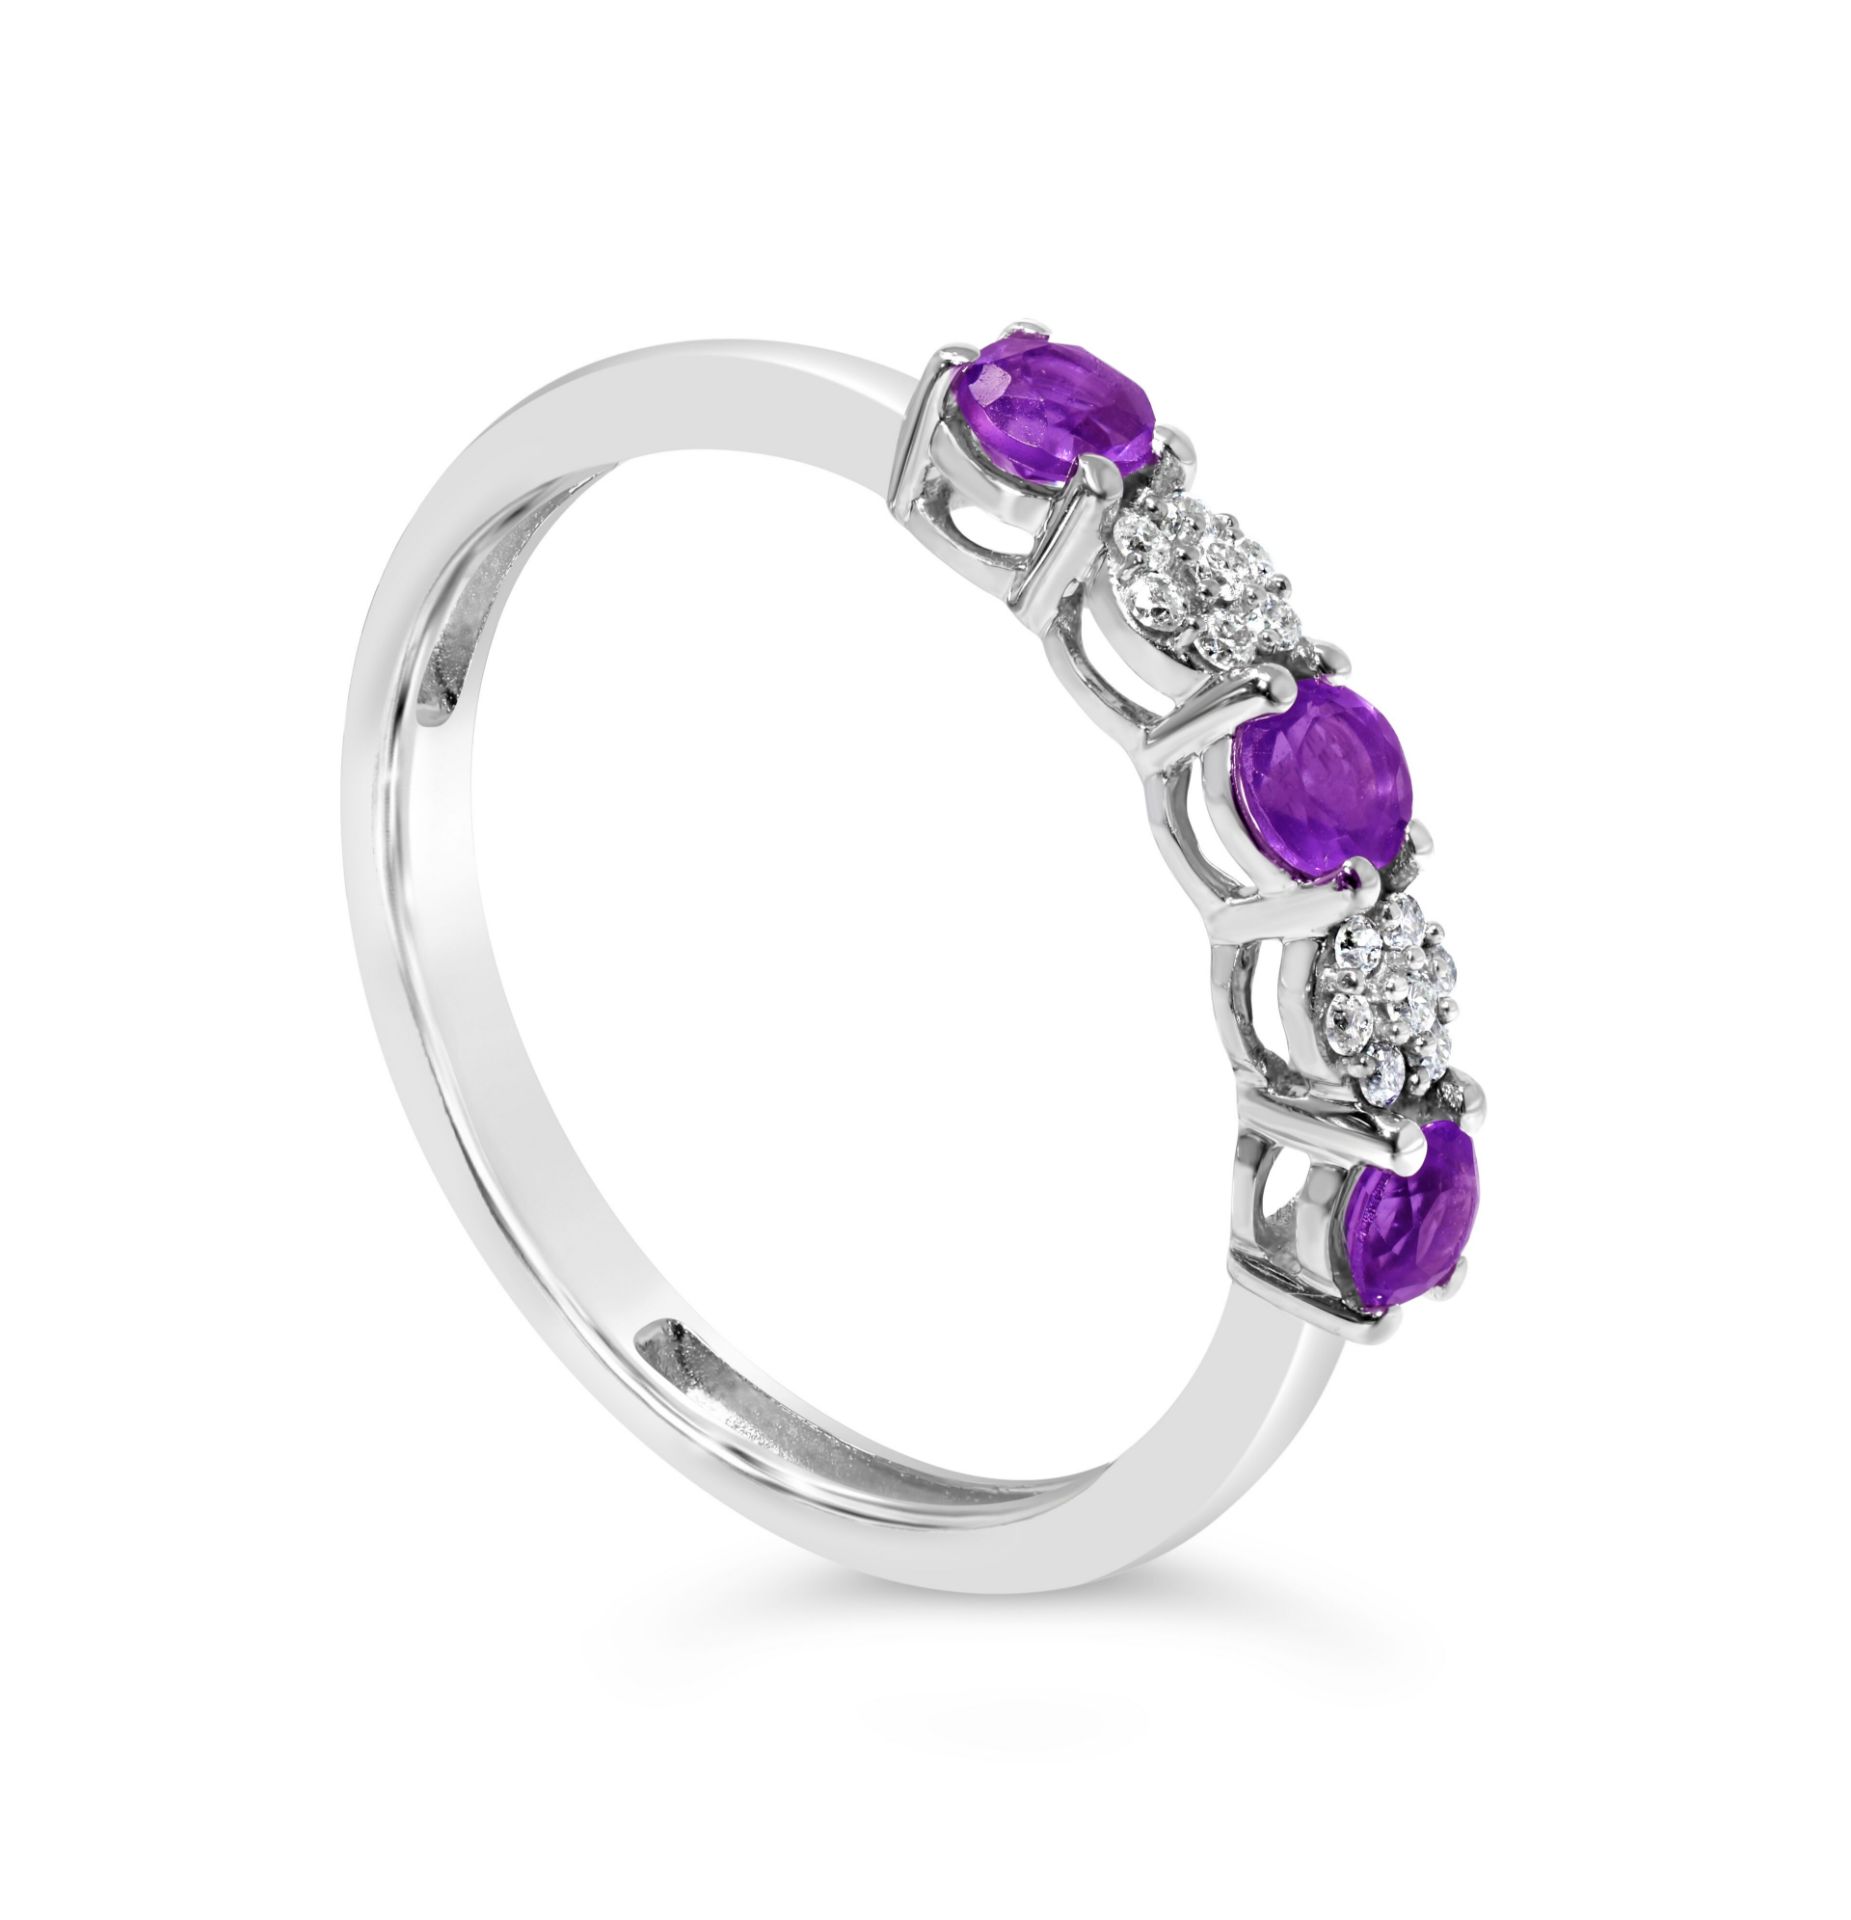 Amethyst and Diamond Eternity Ring, Metal 9ct Whit - Image 2 of 3